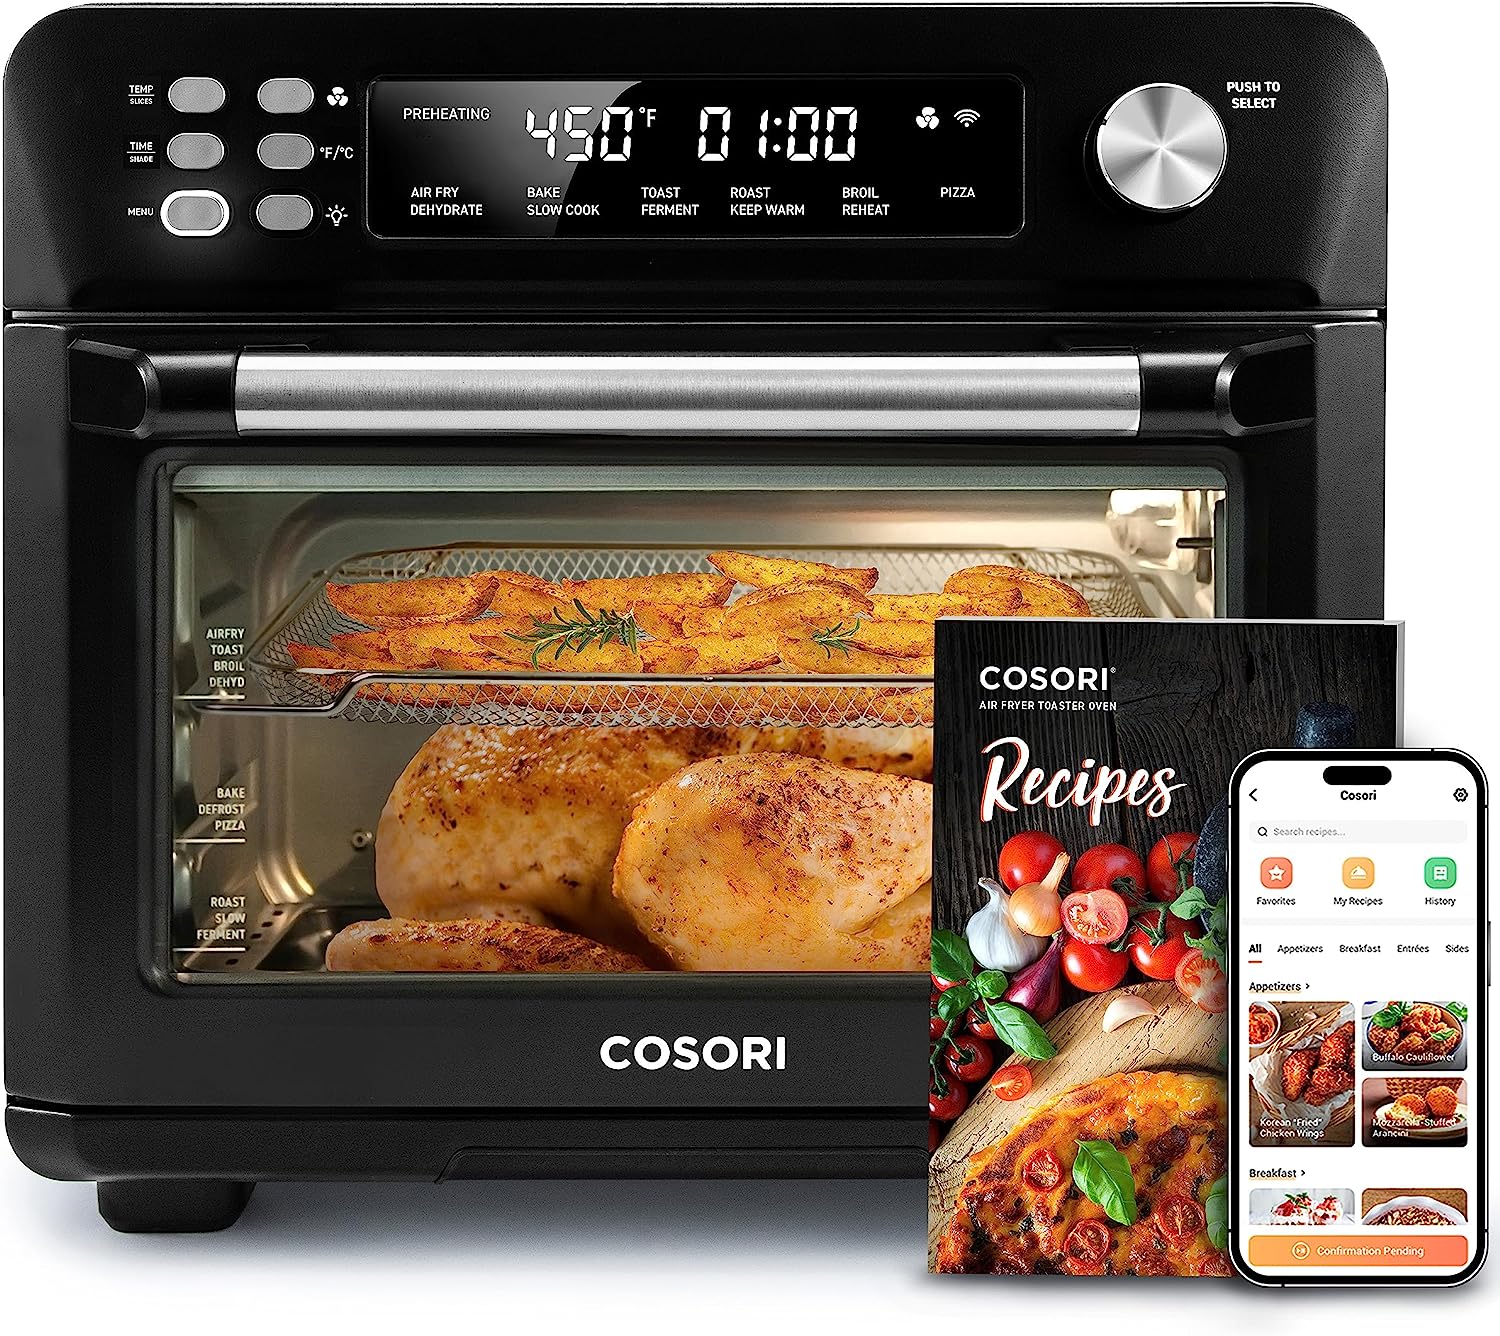 COSORI Toaster Oven Air Fryer Combo, 12-in-1, 26QT [...]